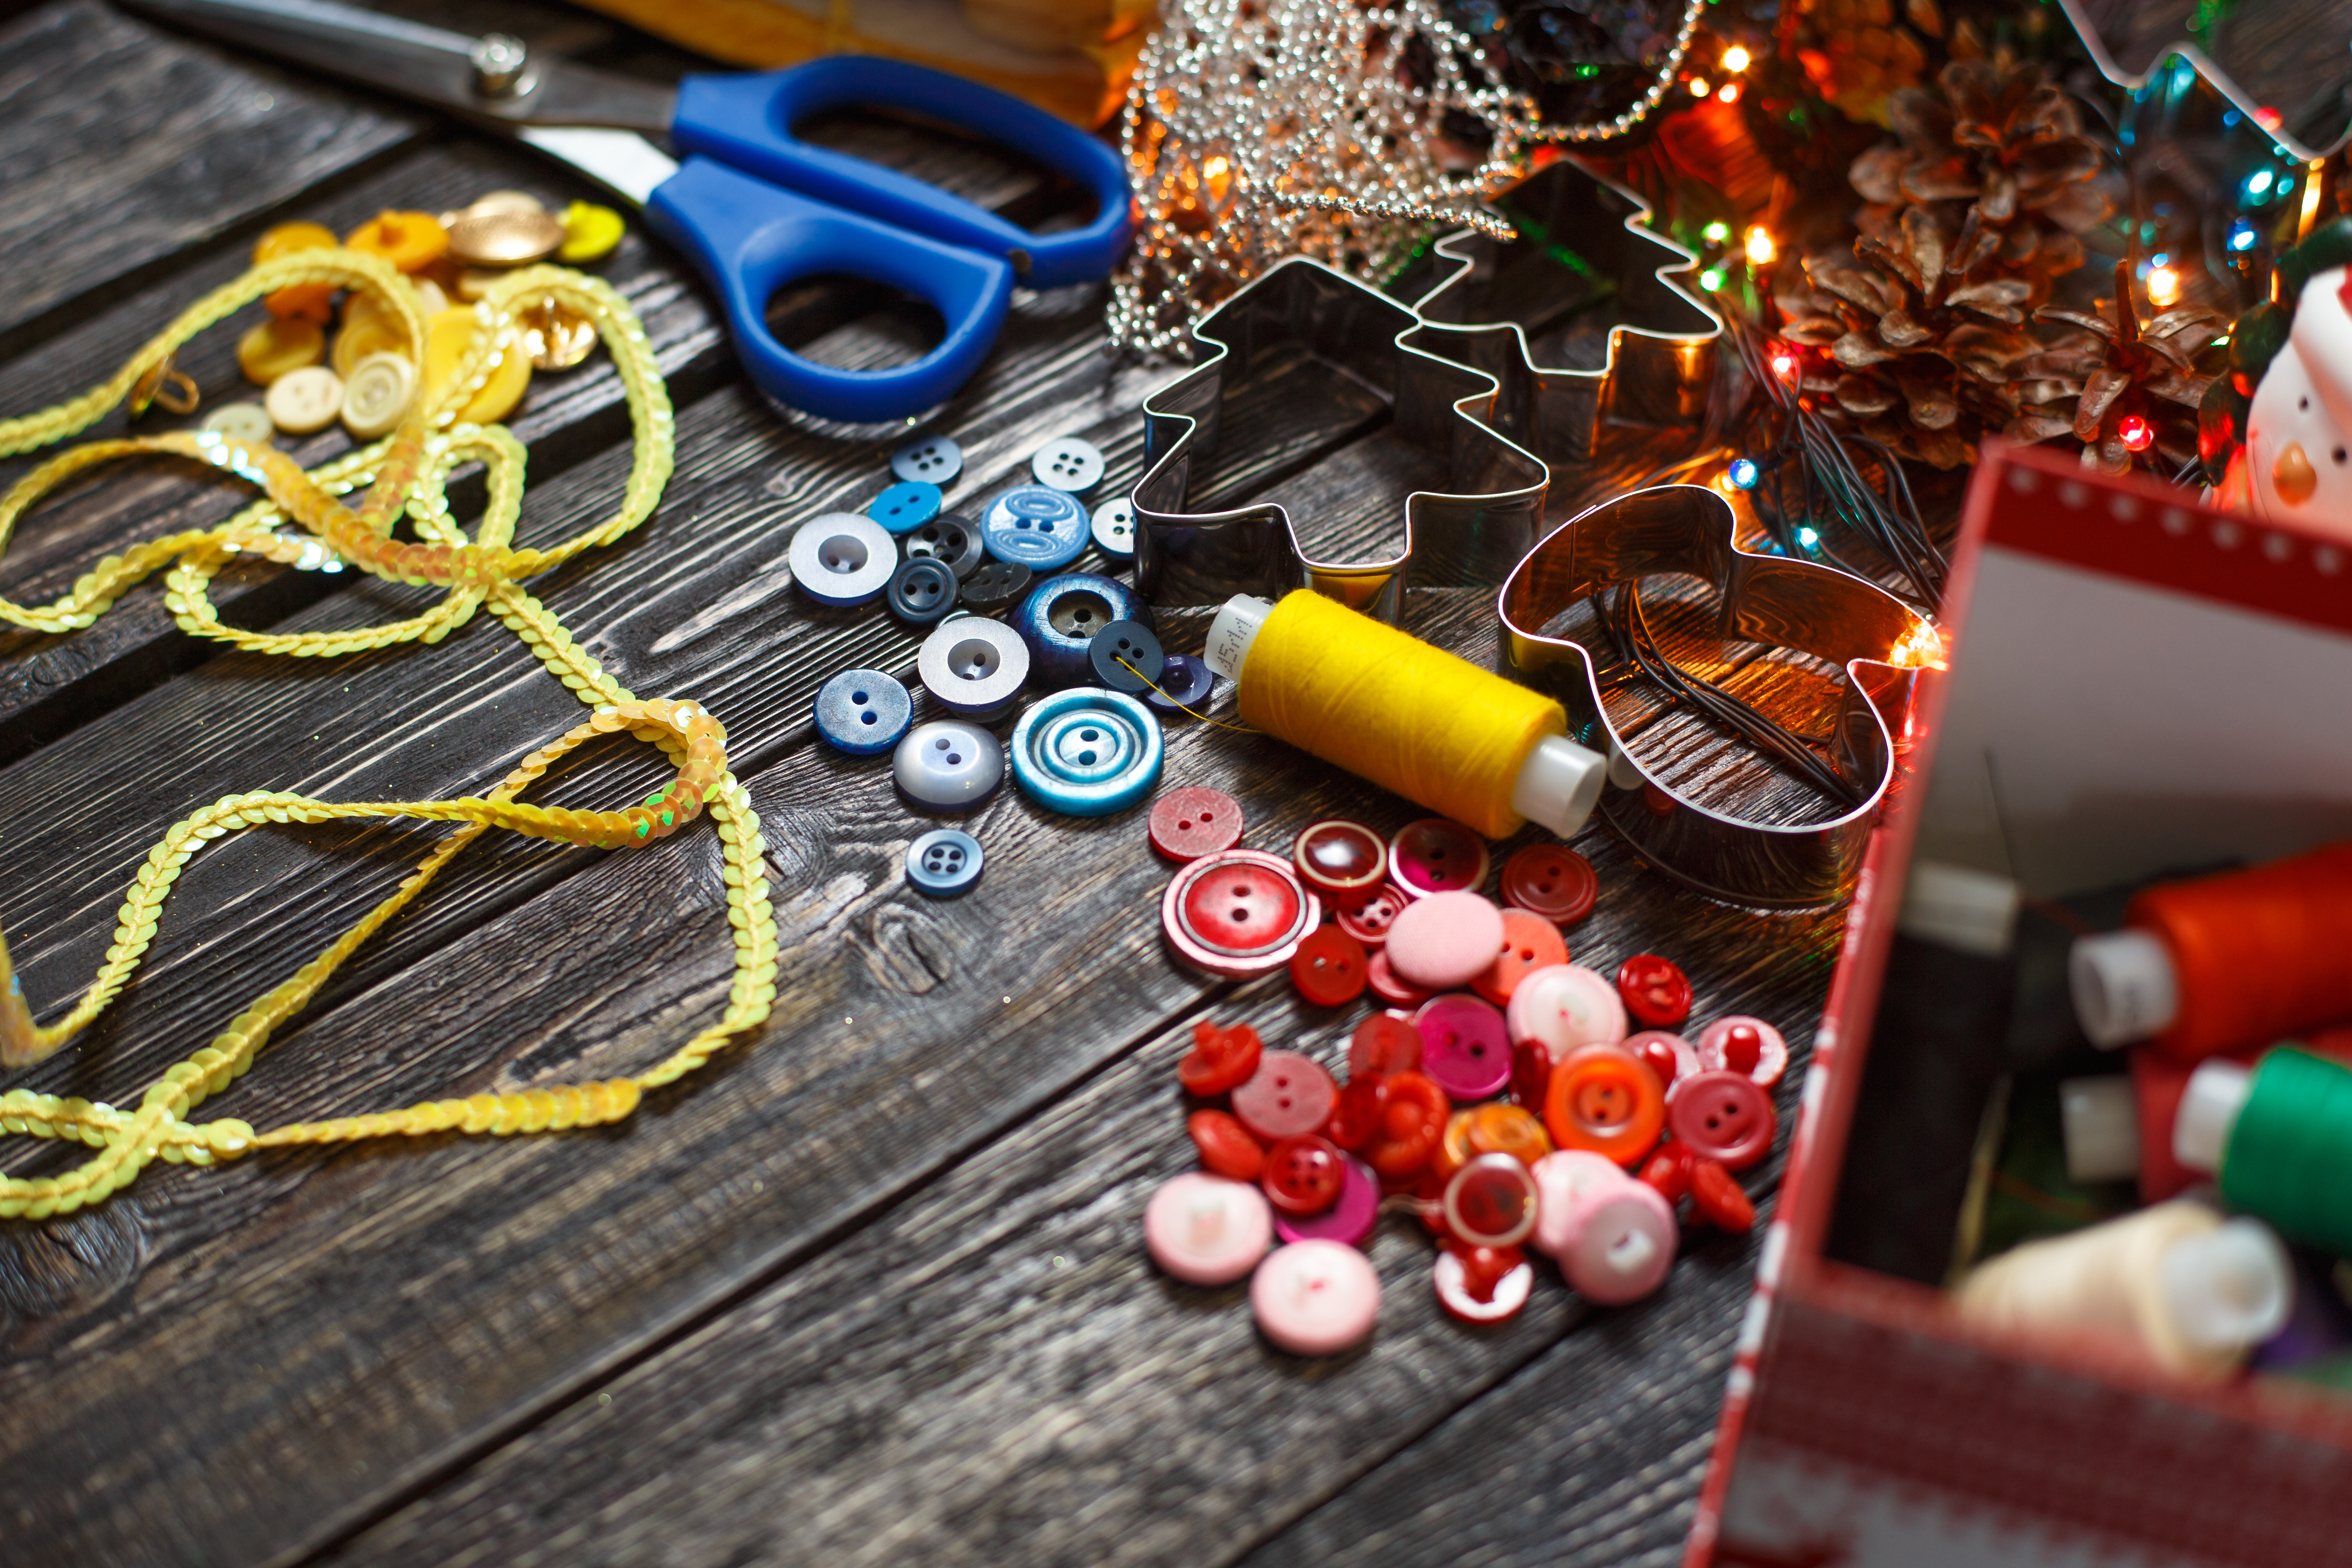 New Year's Eve: 5 Crafts to Get Kids Excited for a Fresh Start